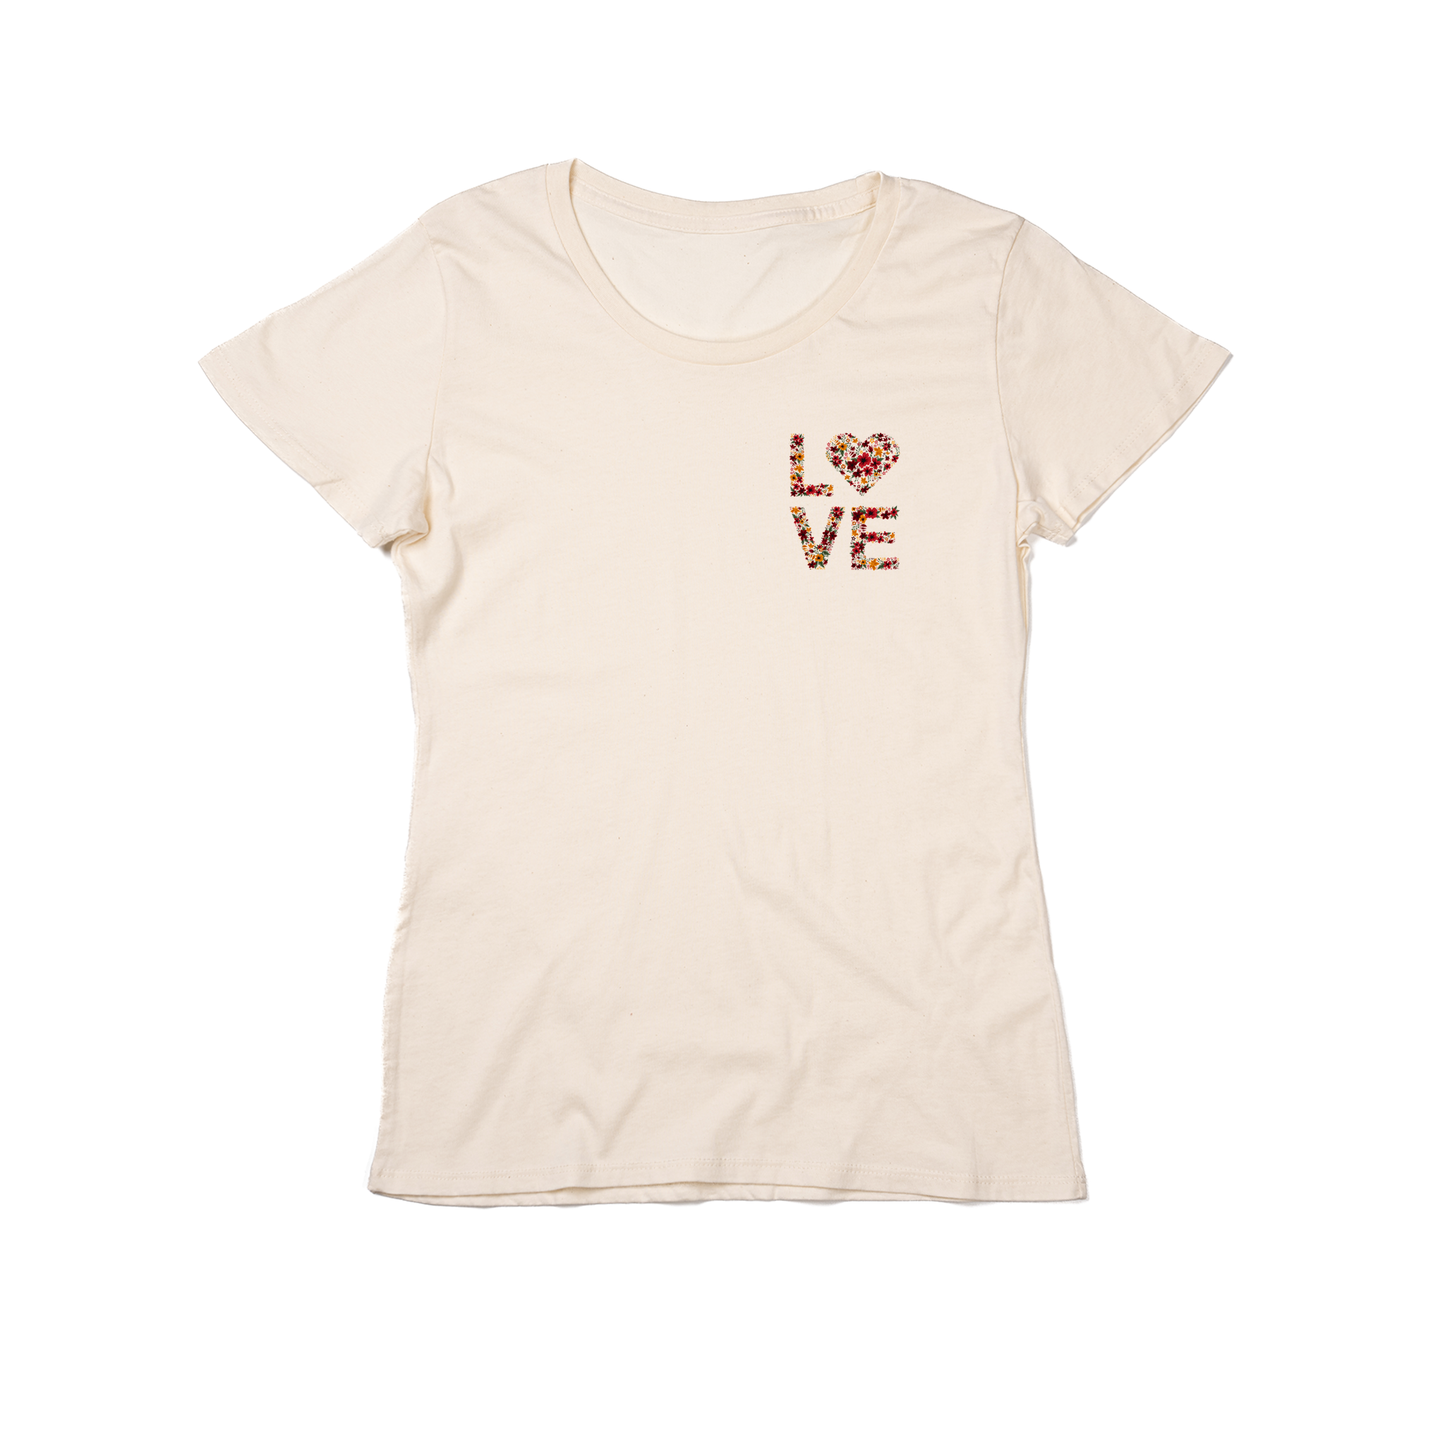 Love Floral (Pocket) - Women's Fitted Tee (Natural)